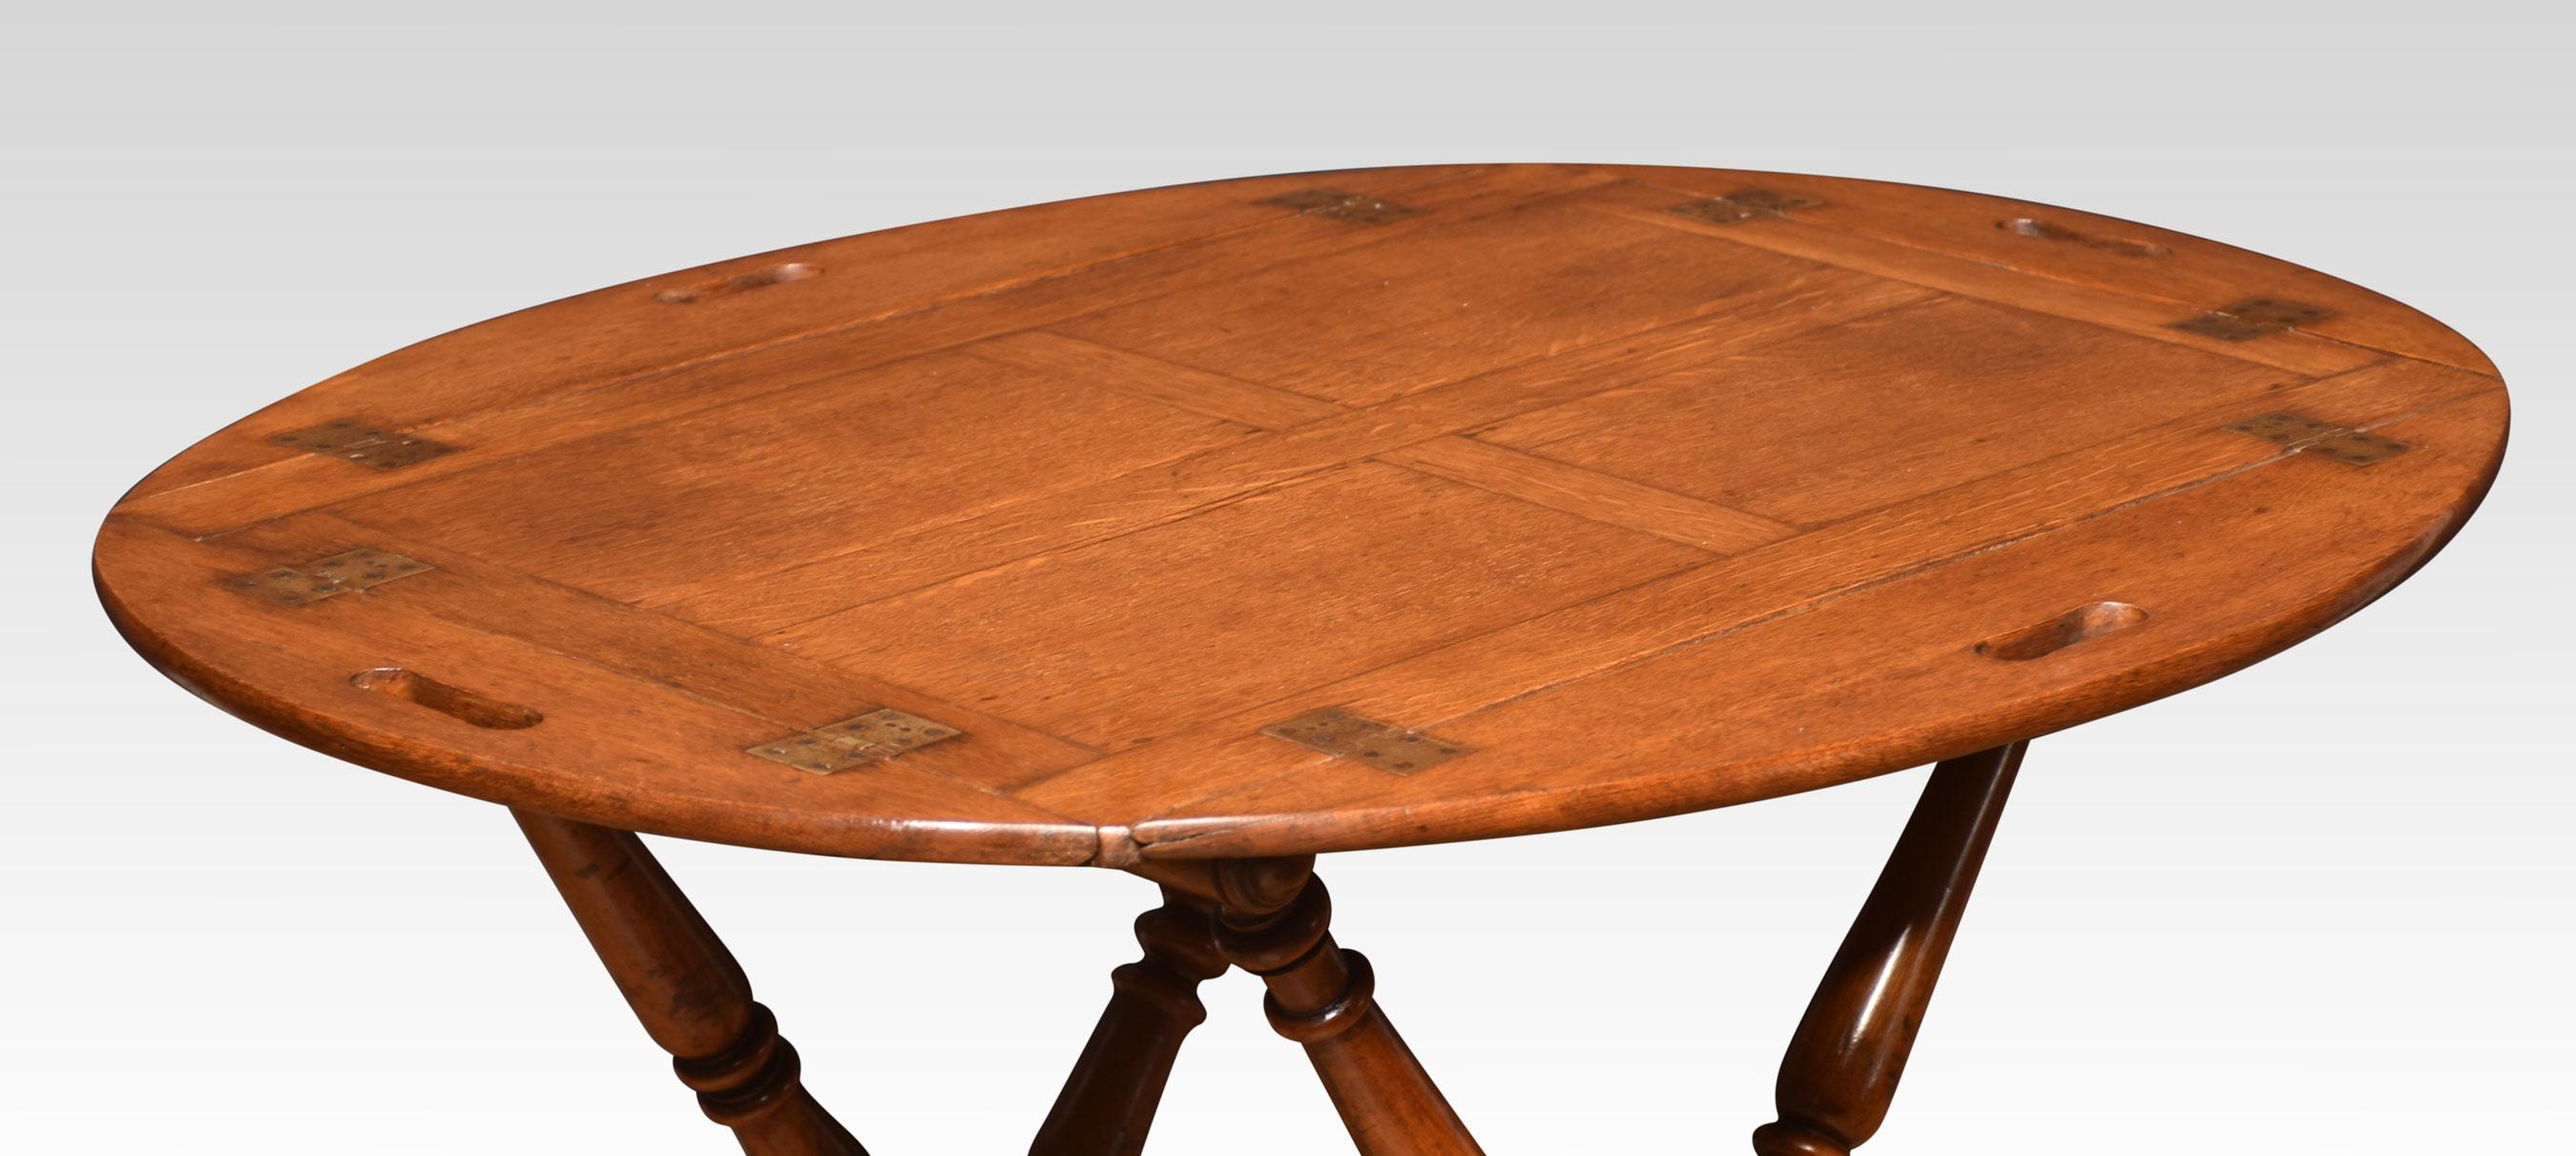 Oak butlers tray, the oval top with four hinged leaves and grab handles. Raised up on folding scissor stand with turned frame.
Dimensions
Height 30 inches
Width 37.5 inches
Depth 28.5 inches.